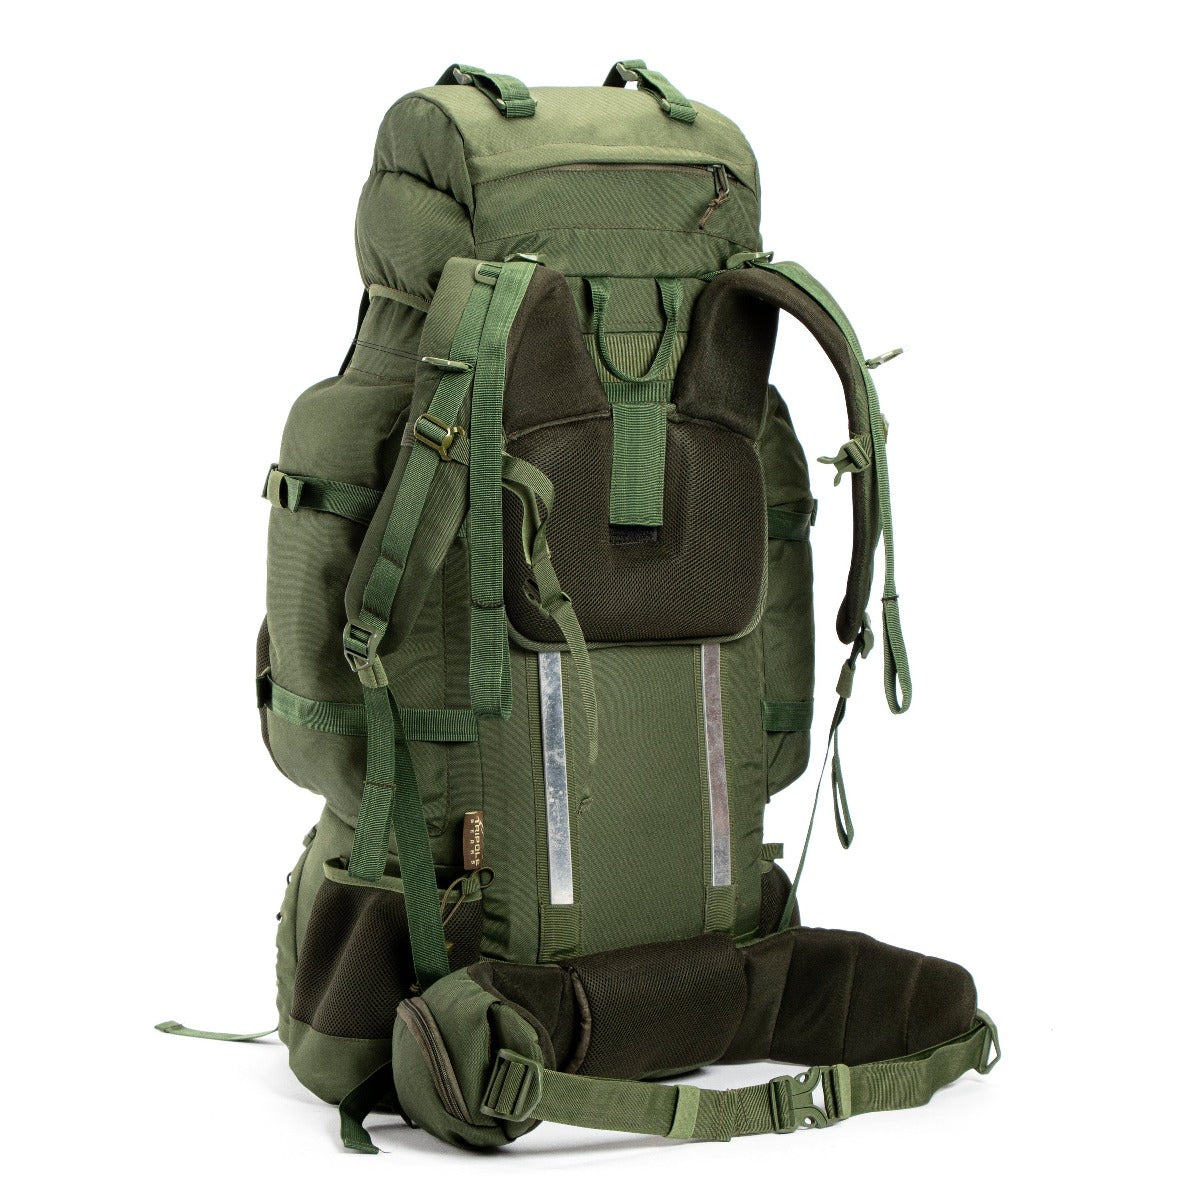 Colonel Pro Metal Frame Rucksack + Detachable Bag & Rain Cover - 90 Litres - Army Green 3